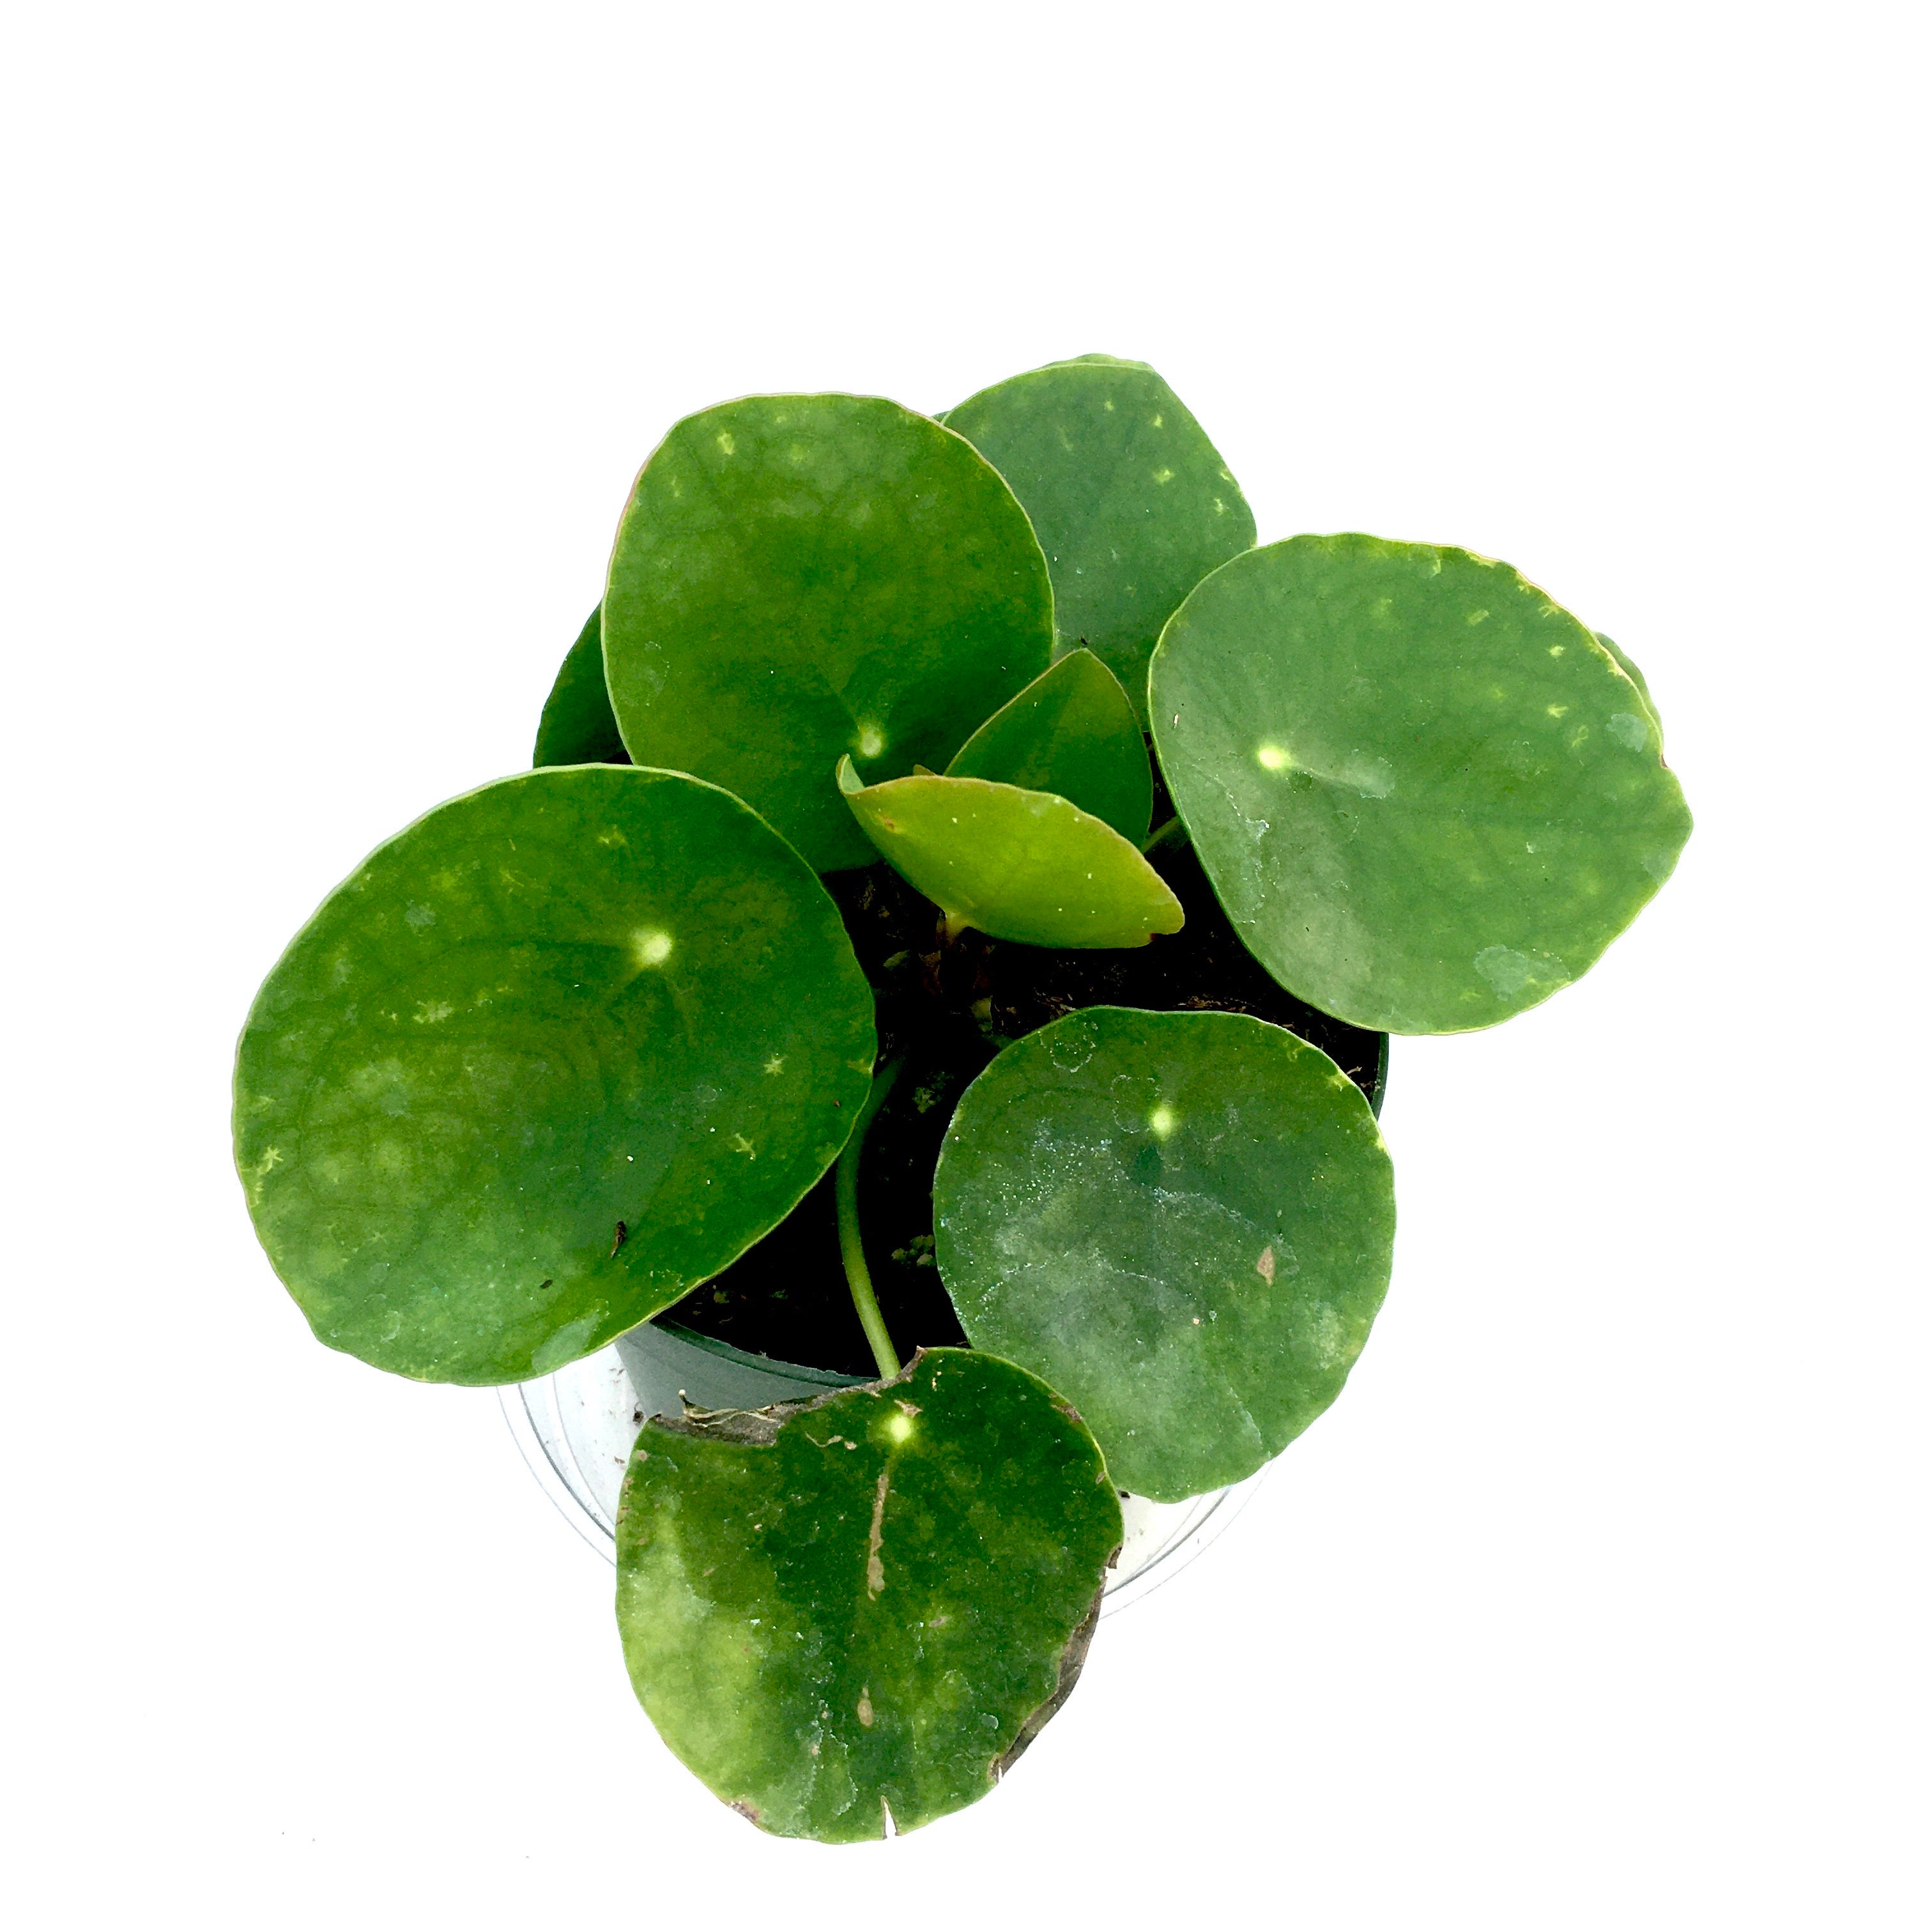 Pilea Peperomioides - Chinese Money Plant